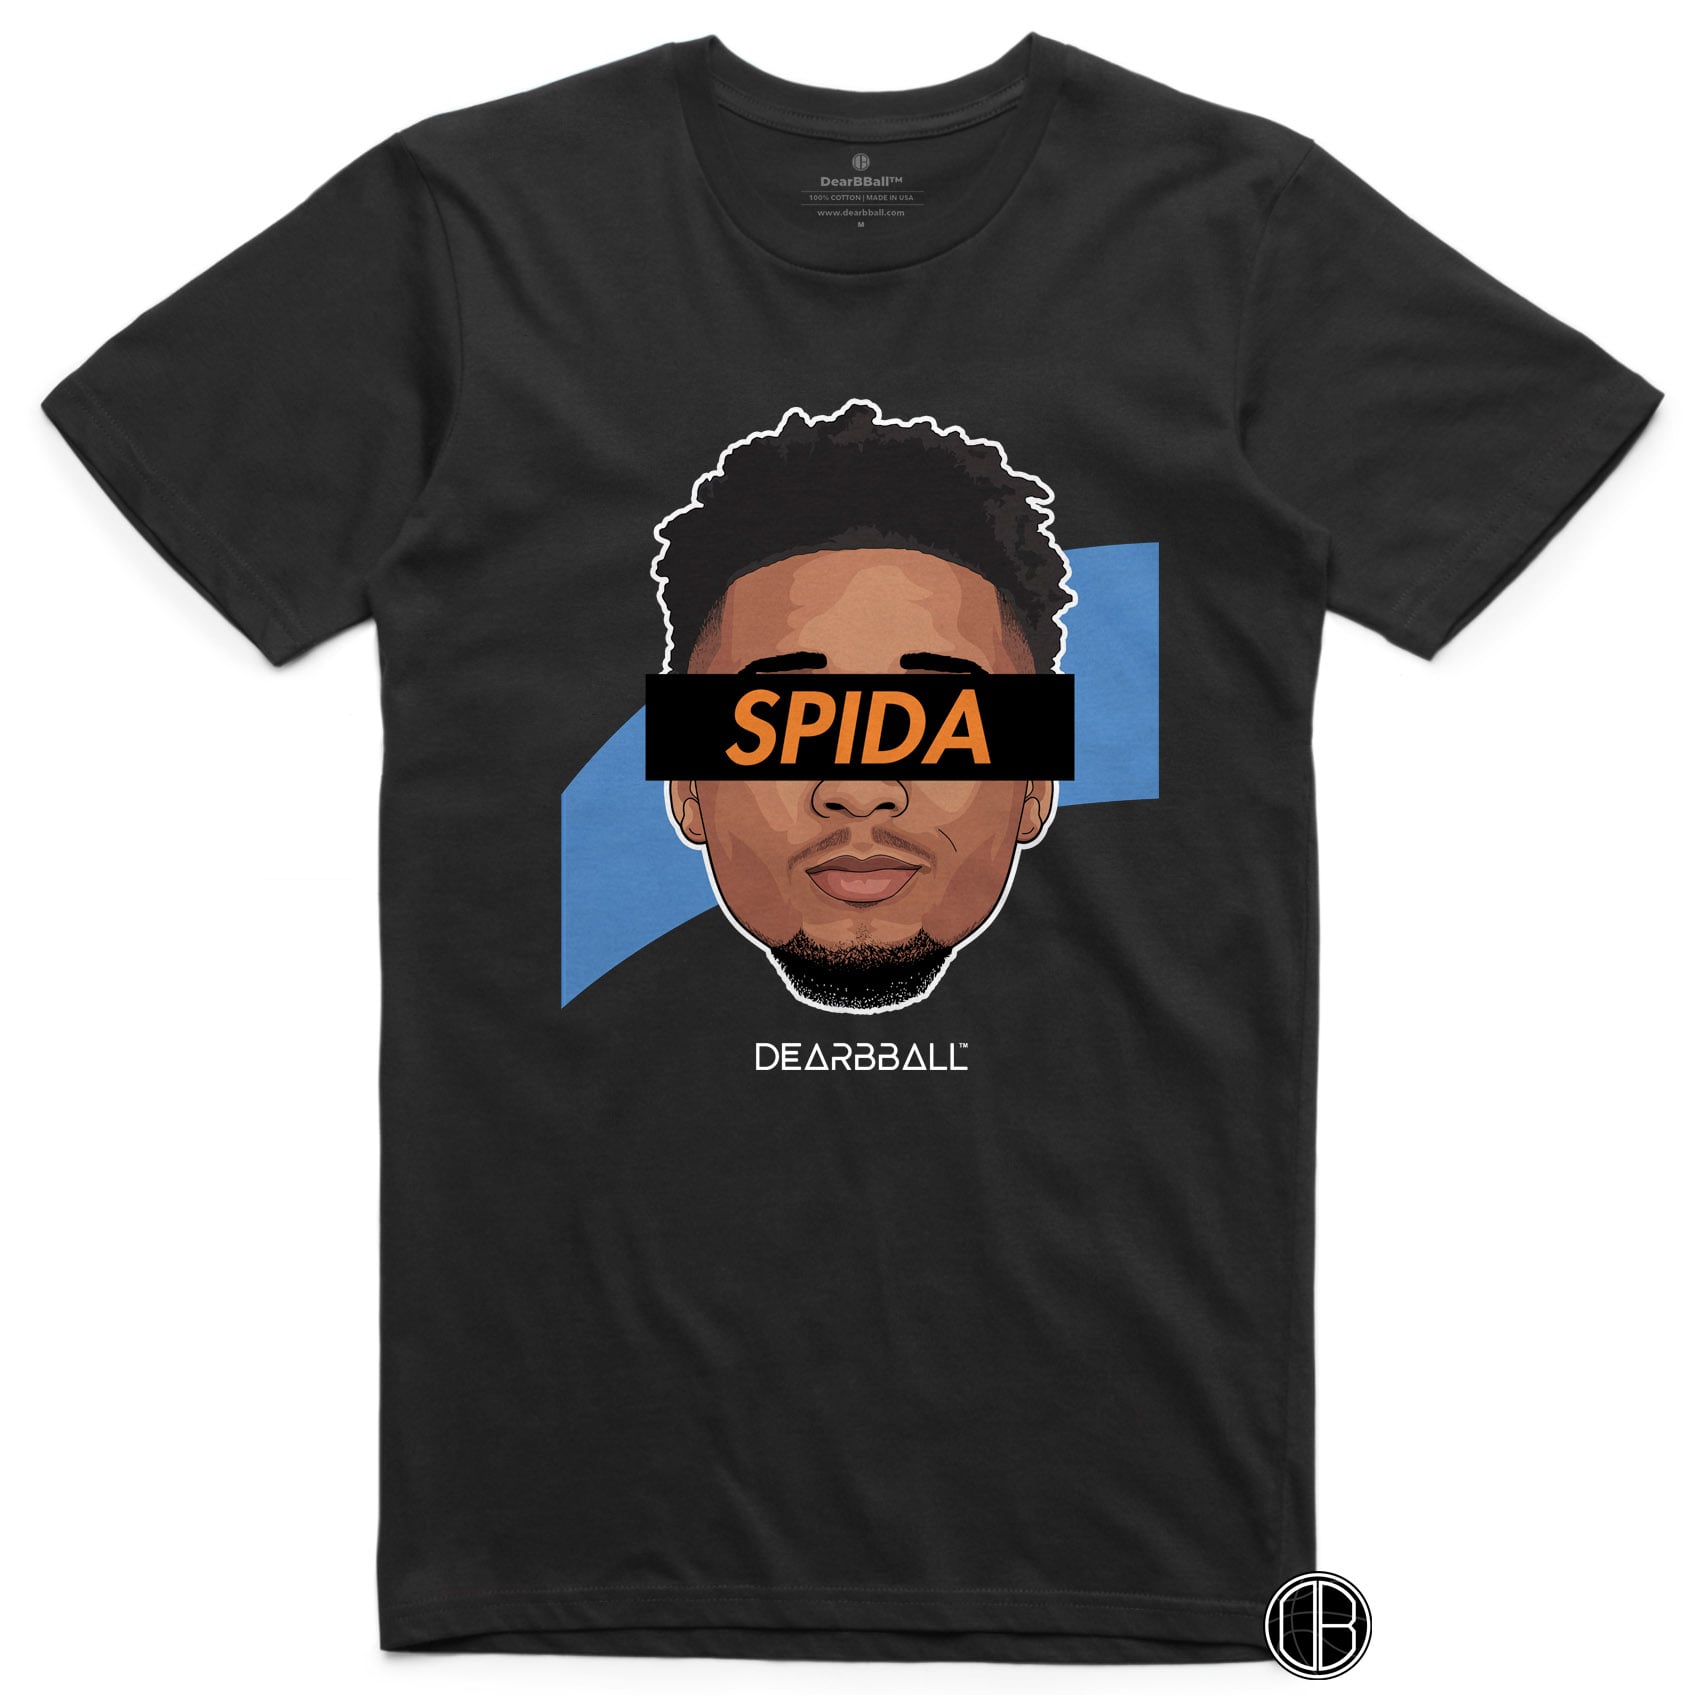 T-Shirt-Donovan-Mitchell-Cleveland-Cavaliers-Dearbball-clothes-brand-france